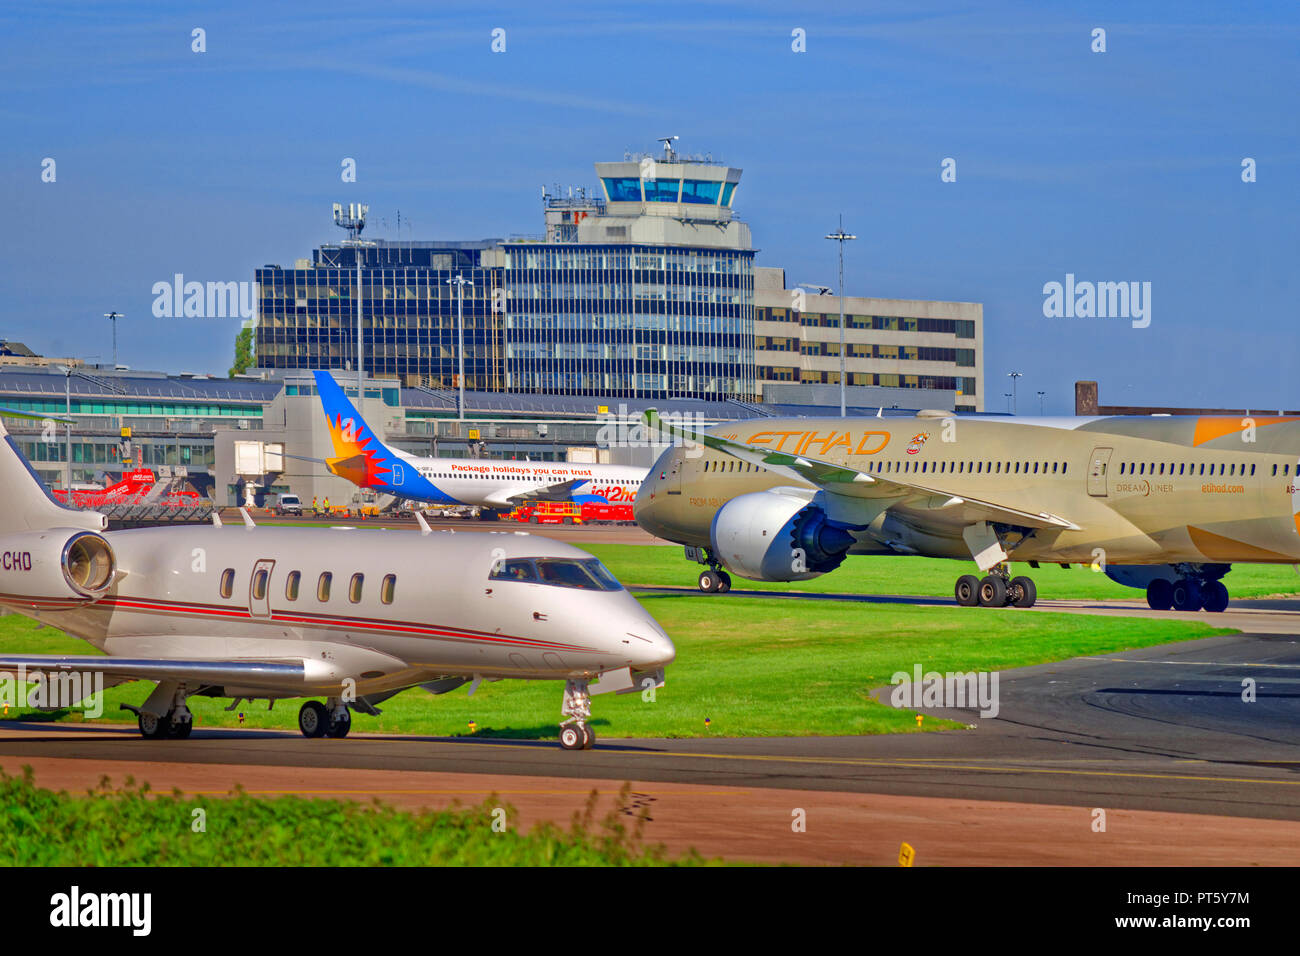 Manchester Airport, Ringway, Greater Manchester, England. UK. Stock Photo